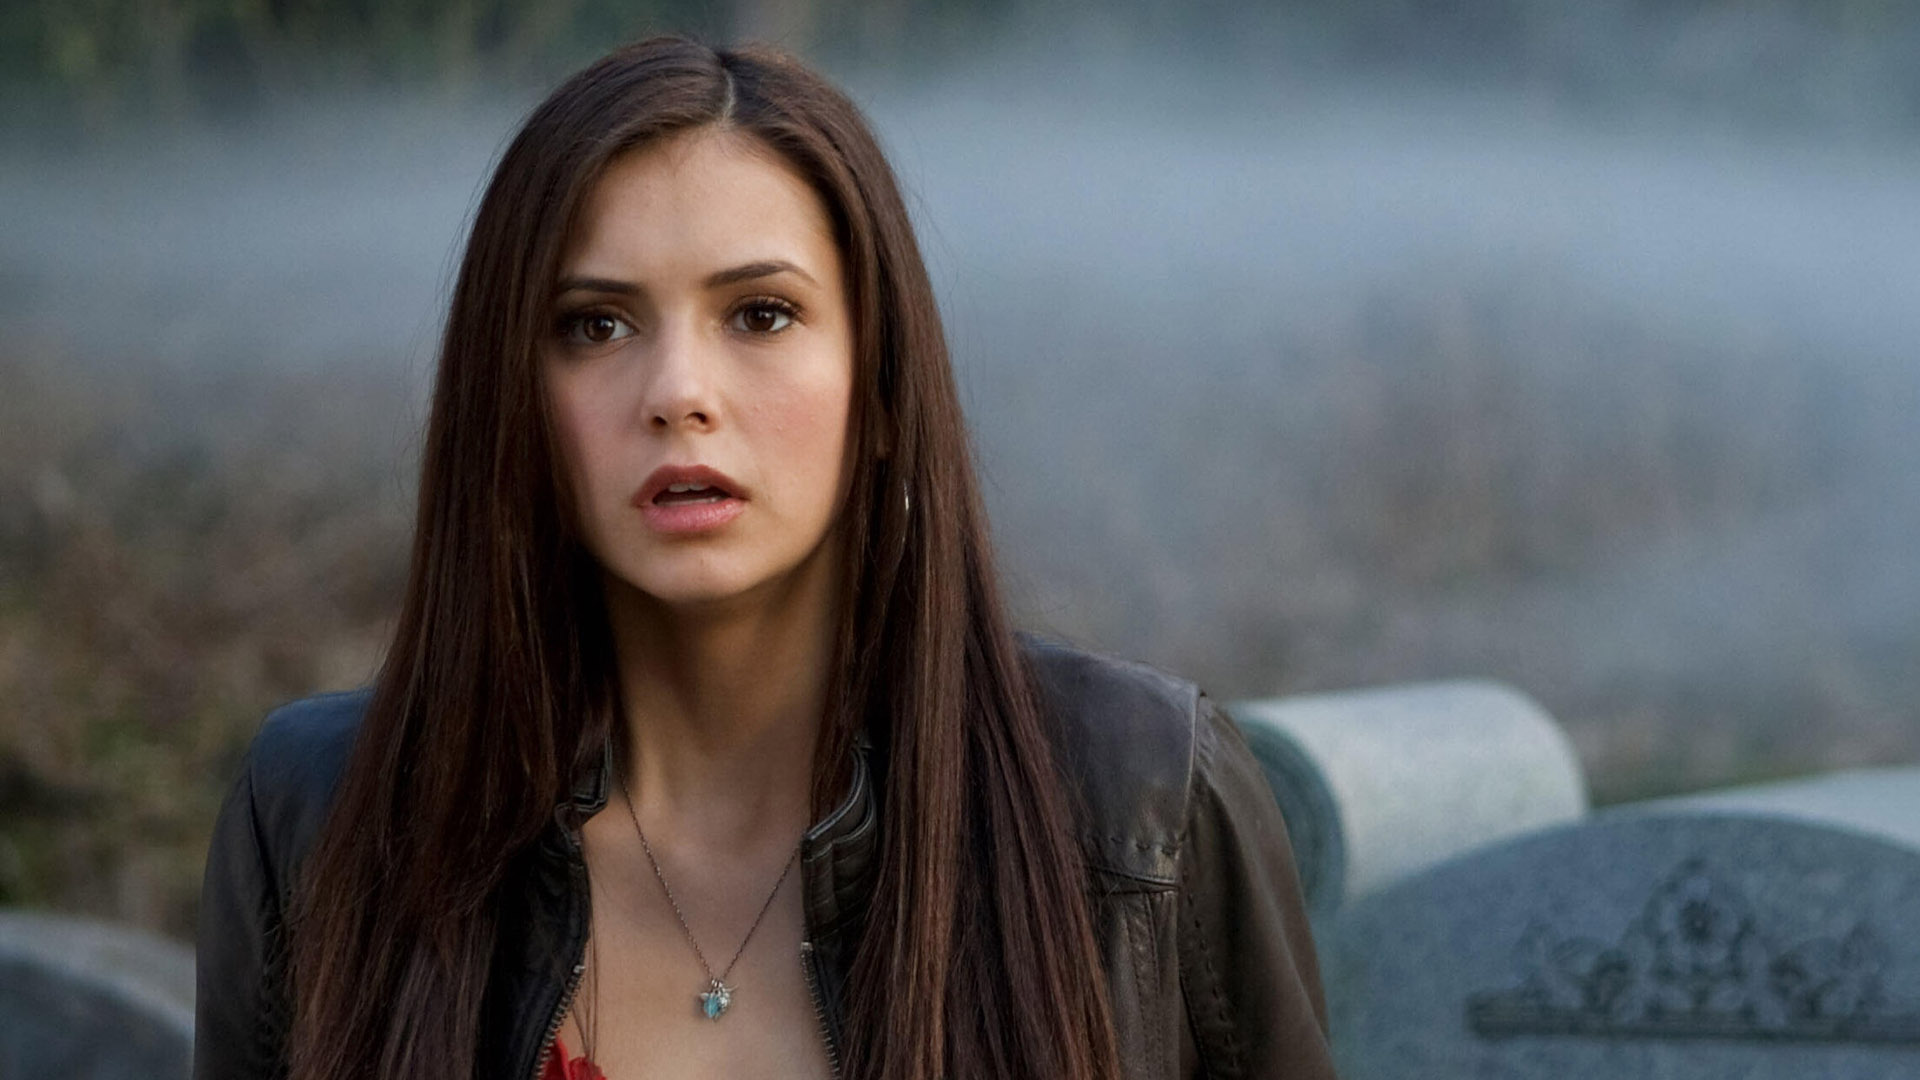 5 Vampire Diaries Characters with Highest Kill Count (No. 5 Alone Has 19 Victims)